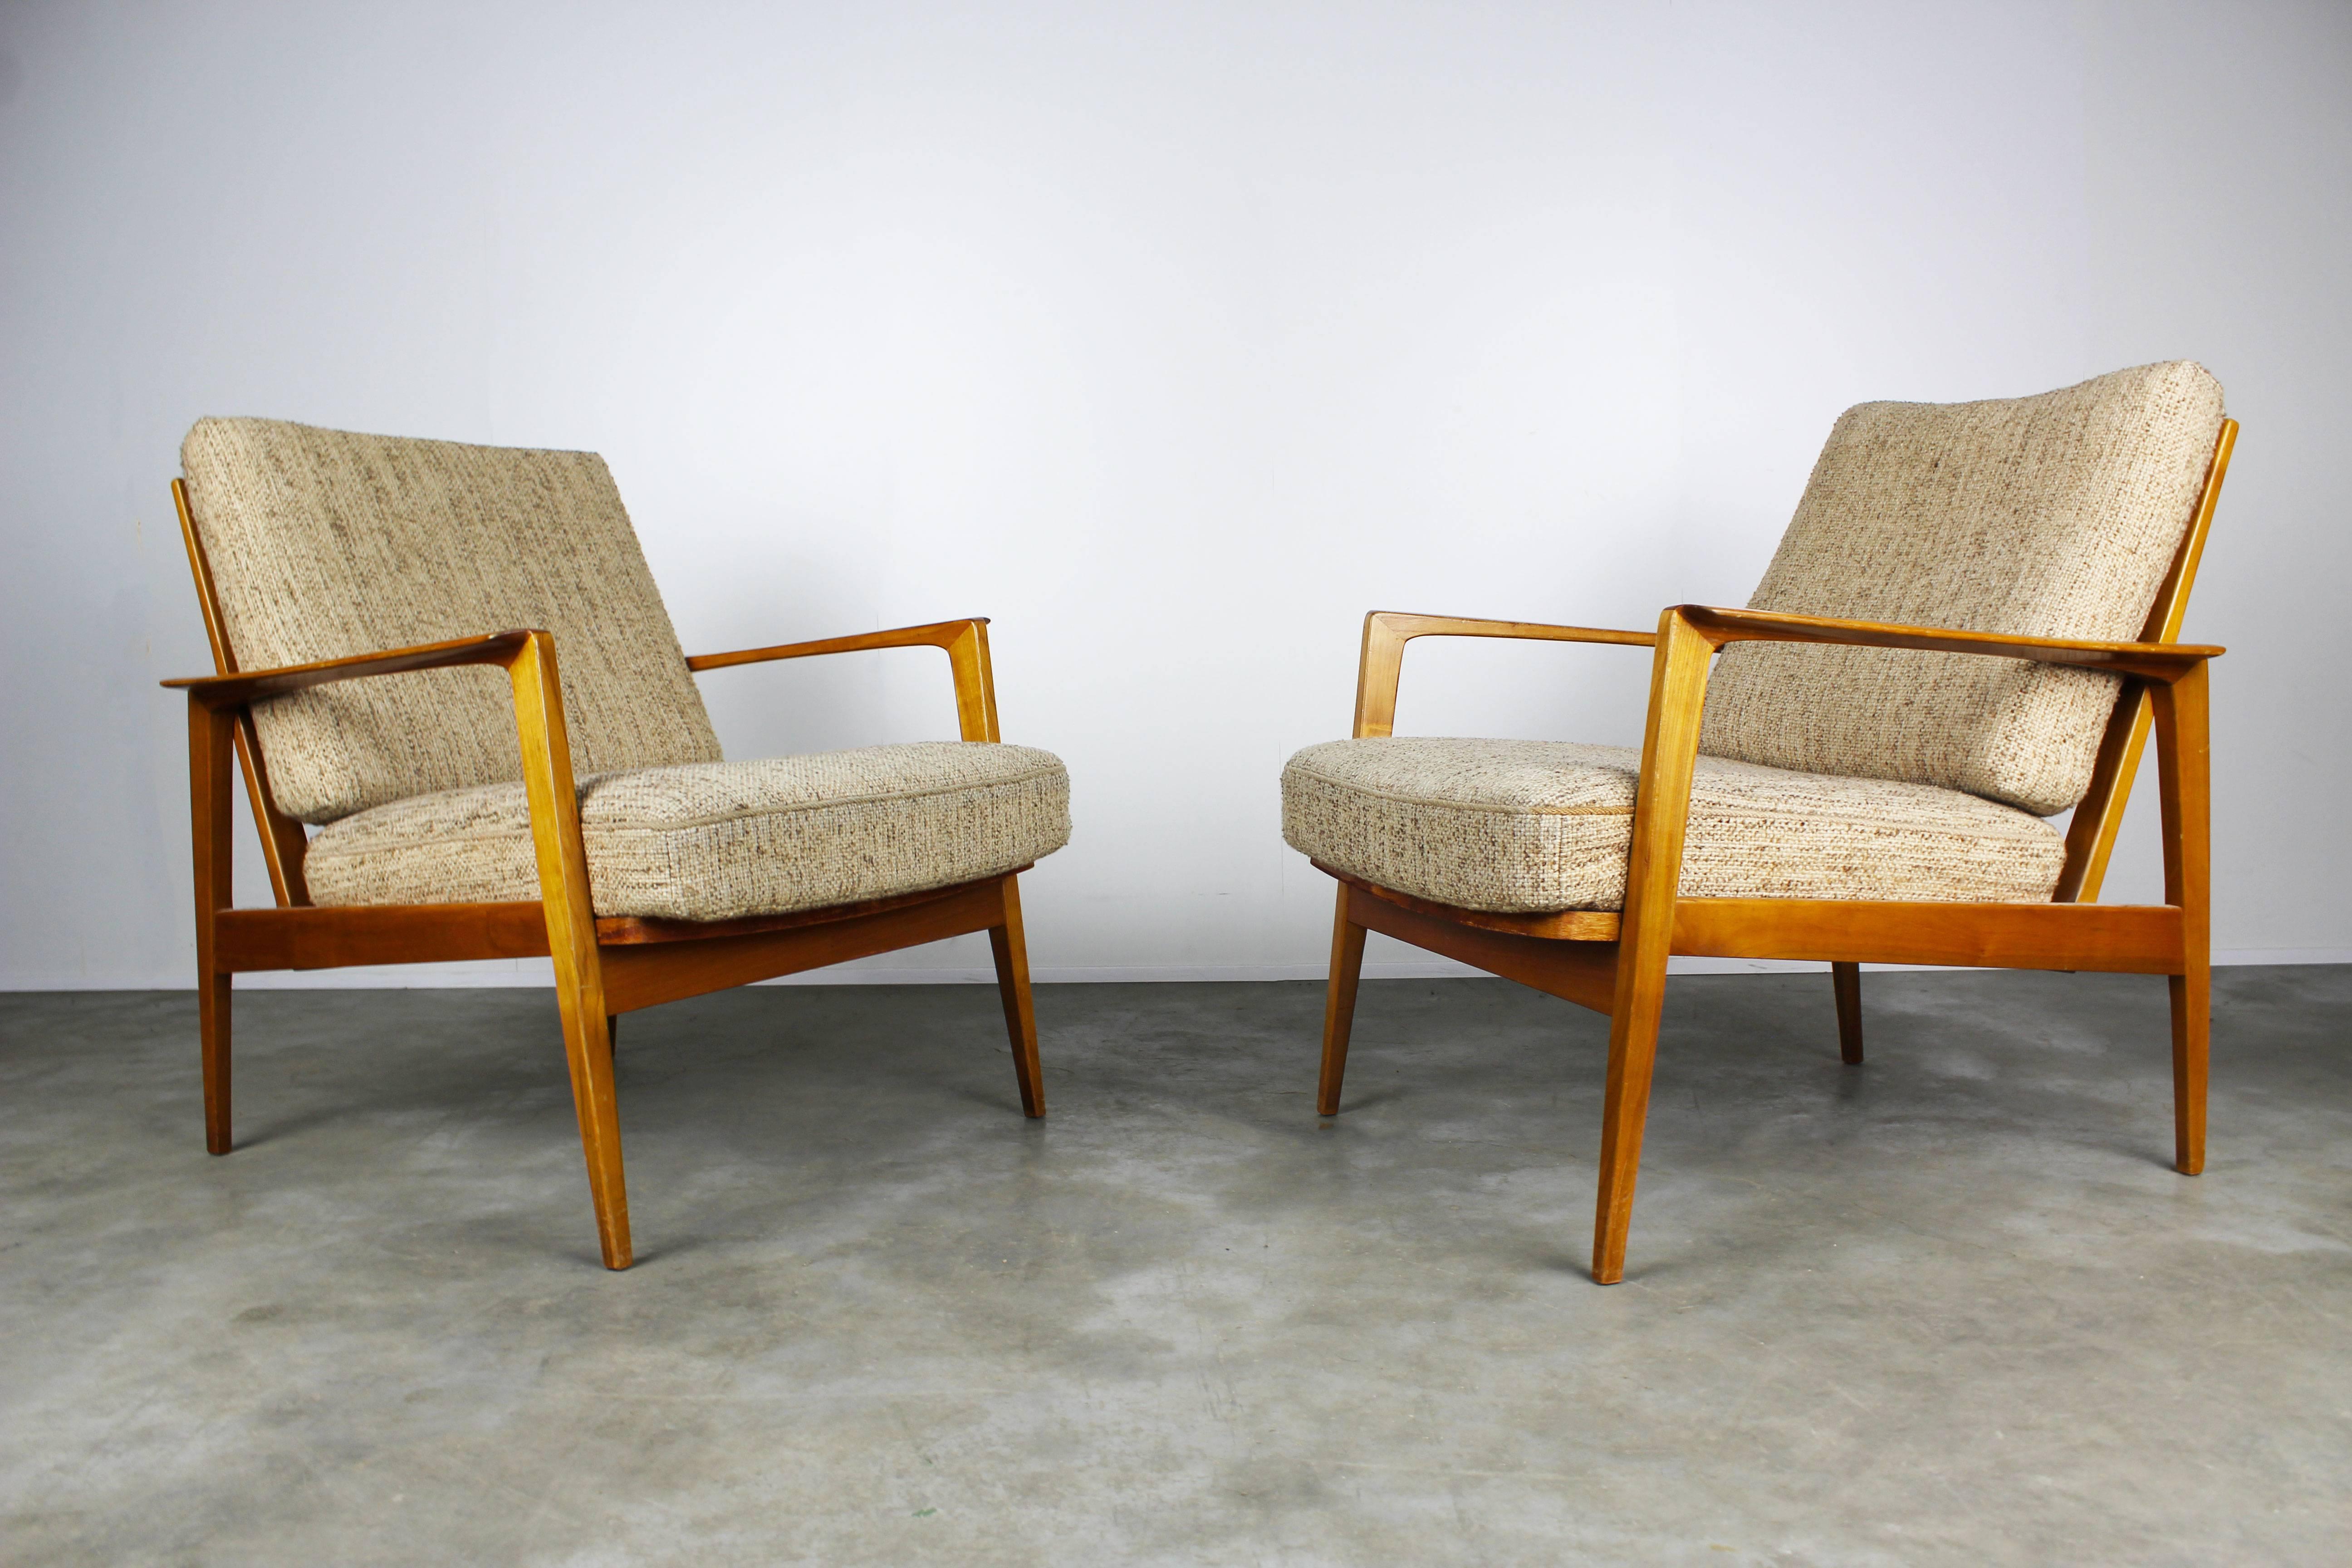 Full Original Knoll Antimott Set 1950 with Easy Chairs and Daybed Beige Brown 2